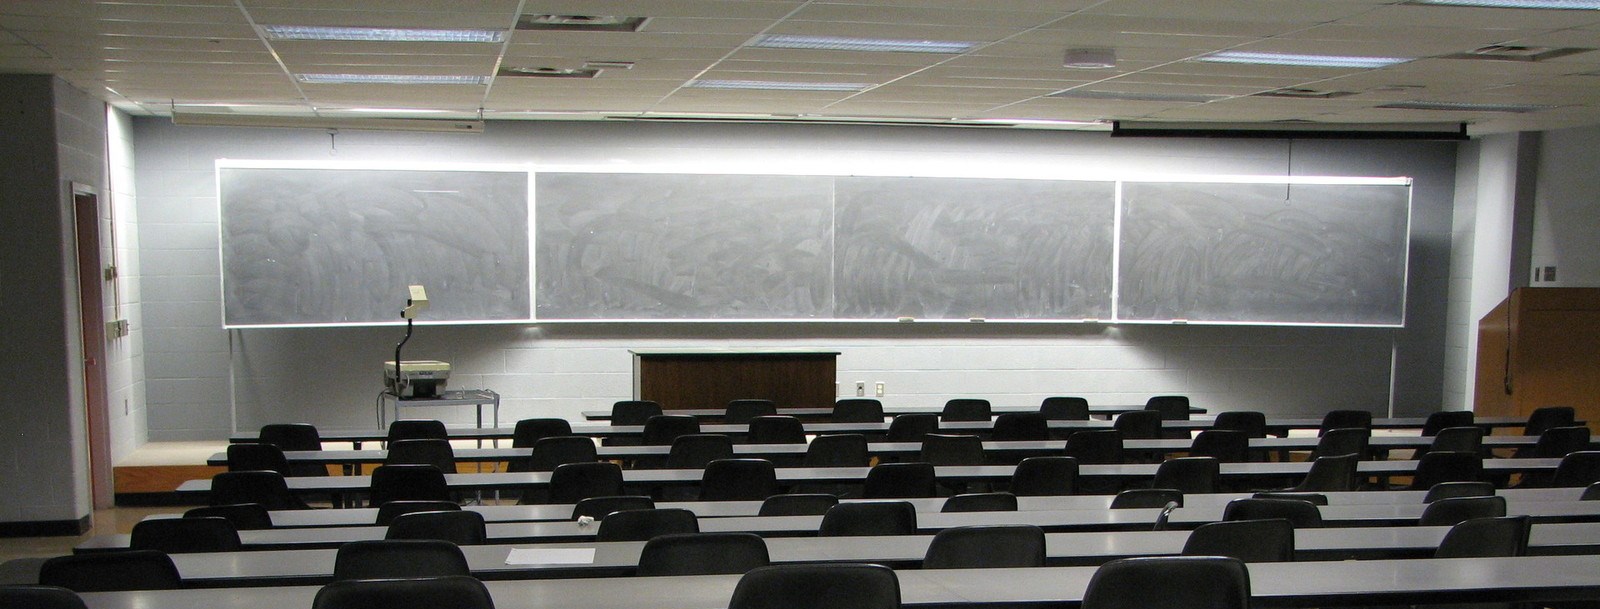 lecture-room-3-1229037-1600x1200